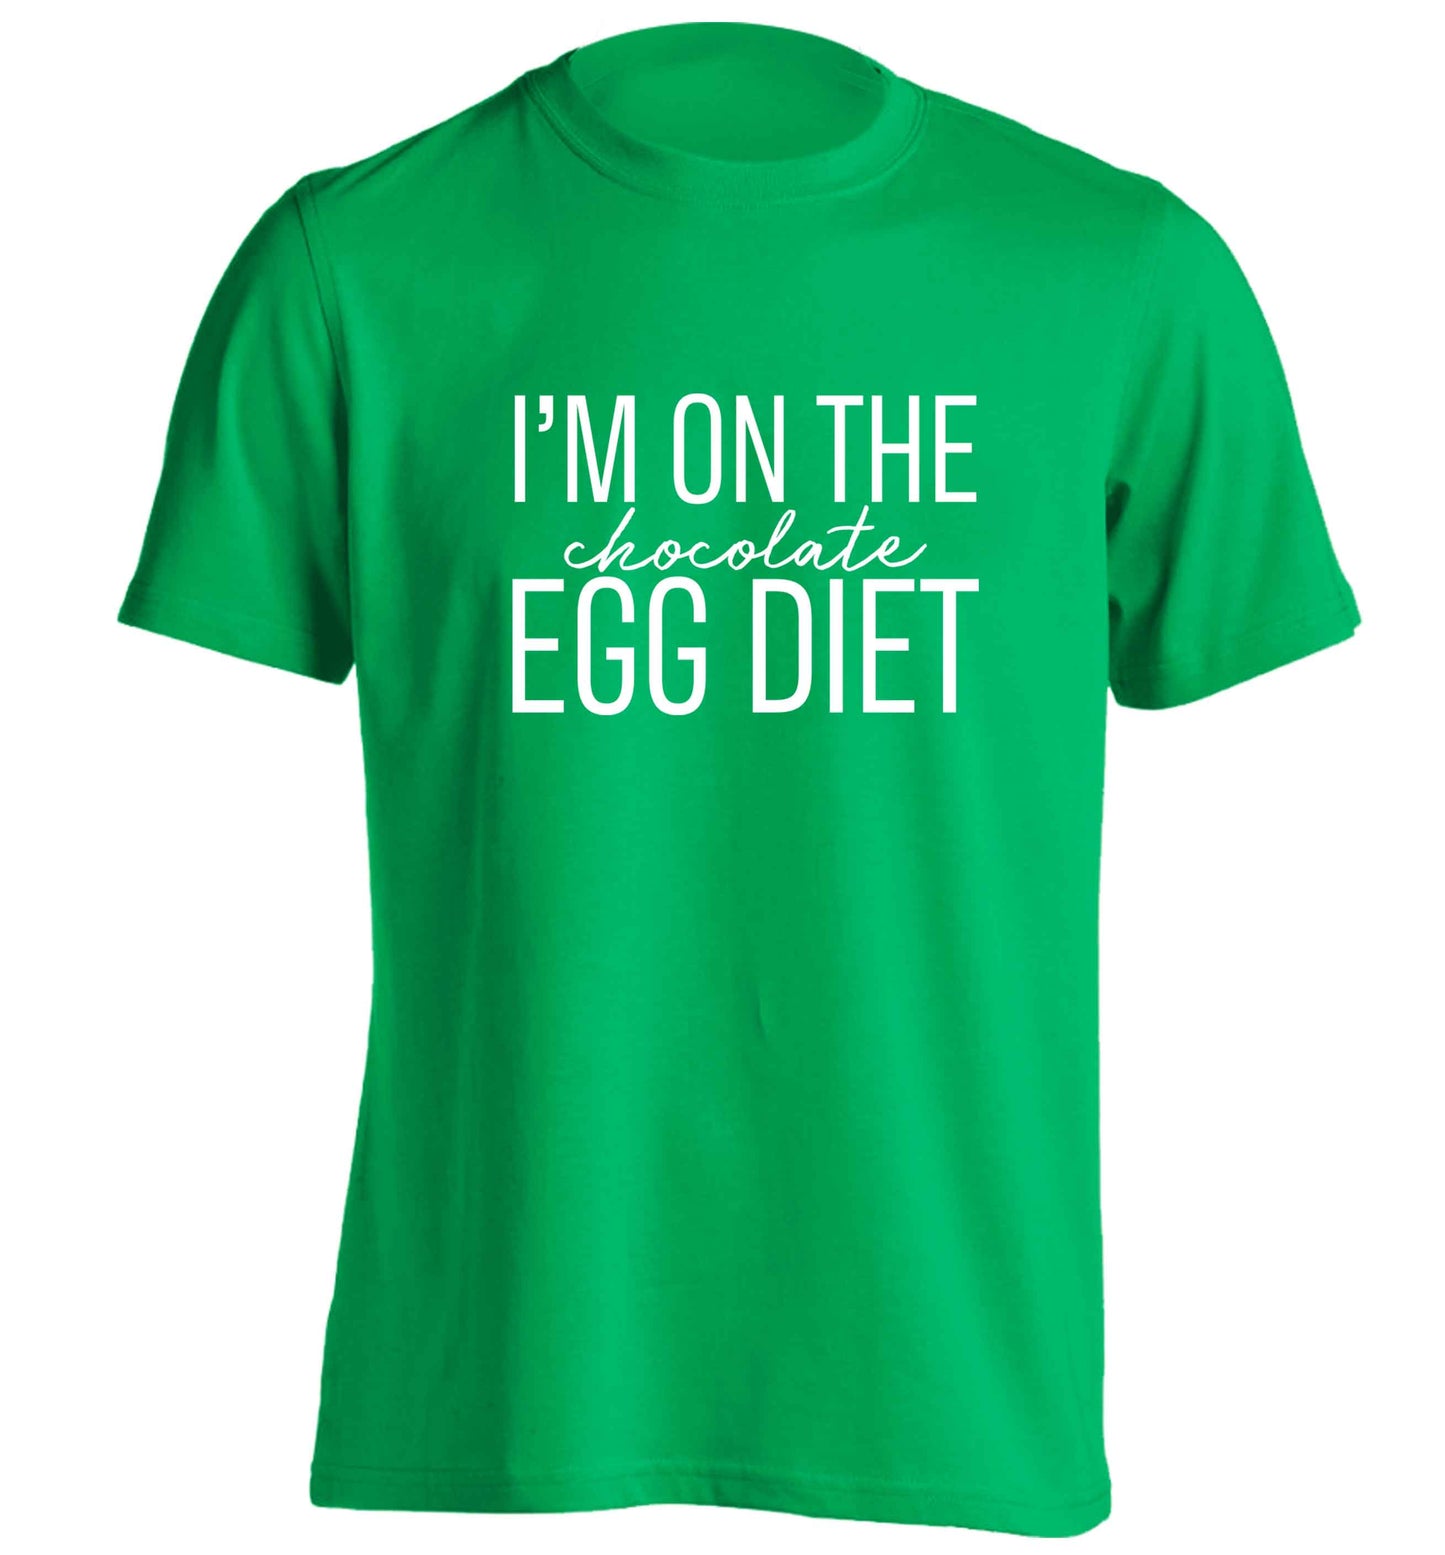 I'm on the chocolate egg diet adults unisex green Tshirt 2XL